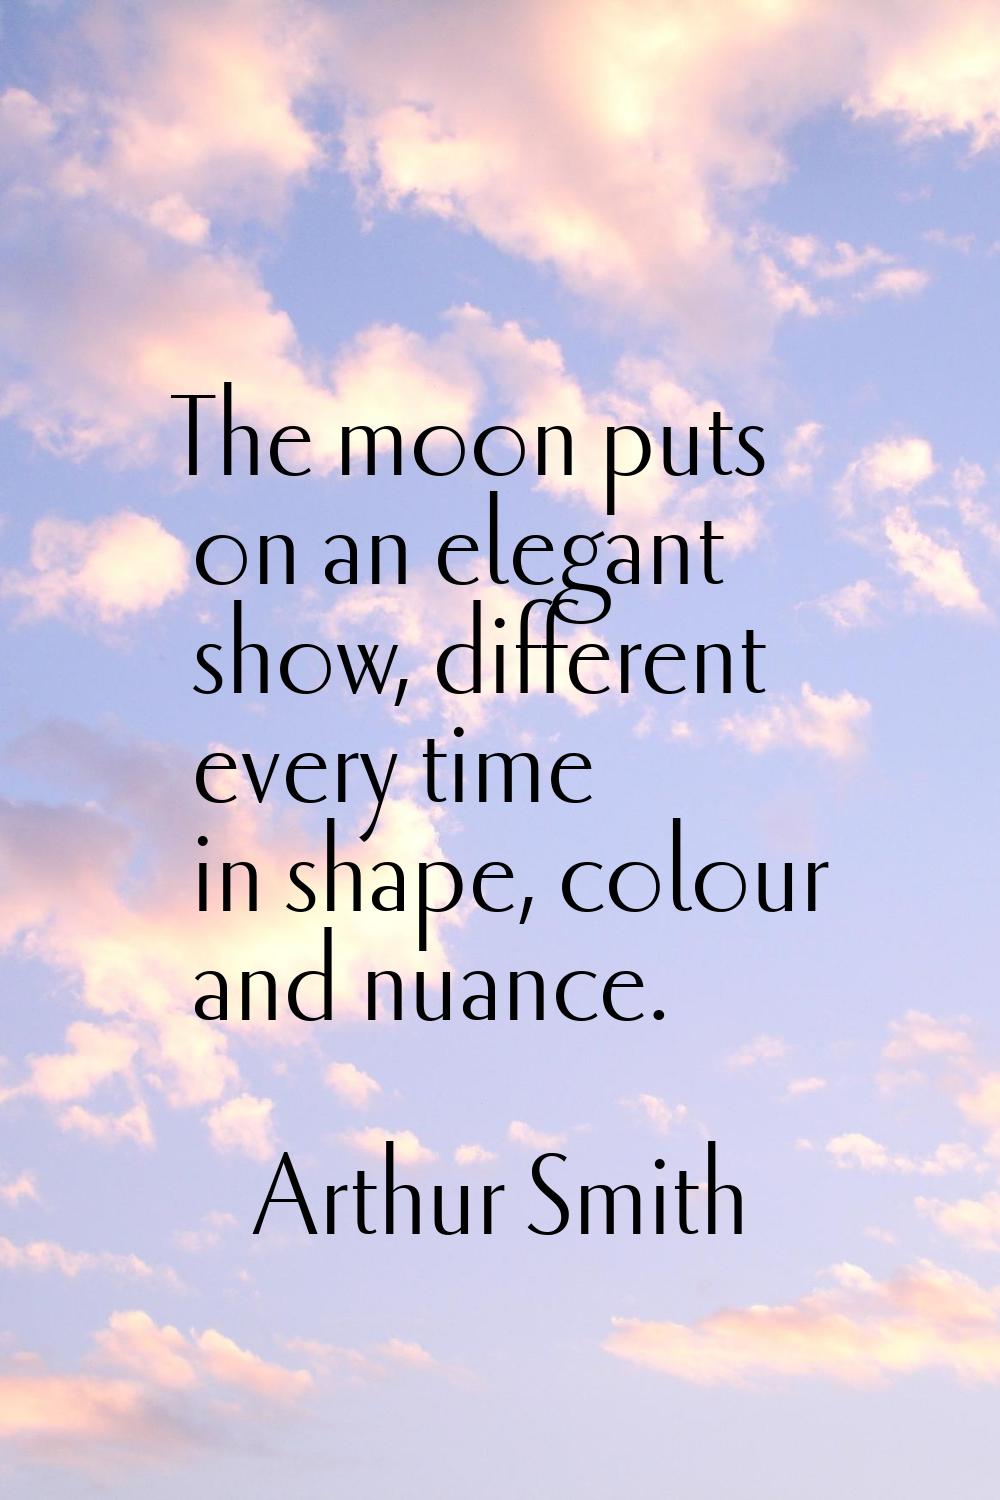 The moon puts on an elegant show, different every time in shape, colour and nuance.